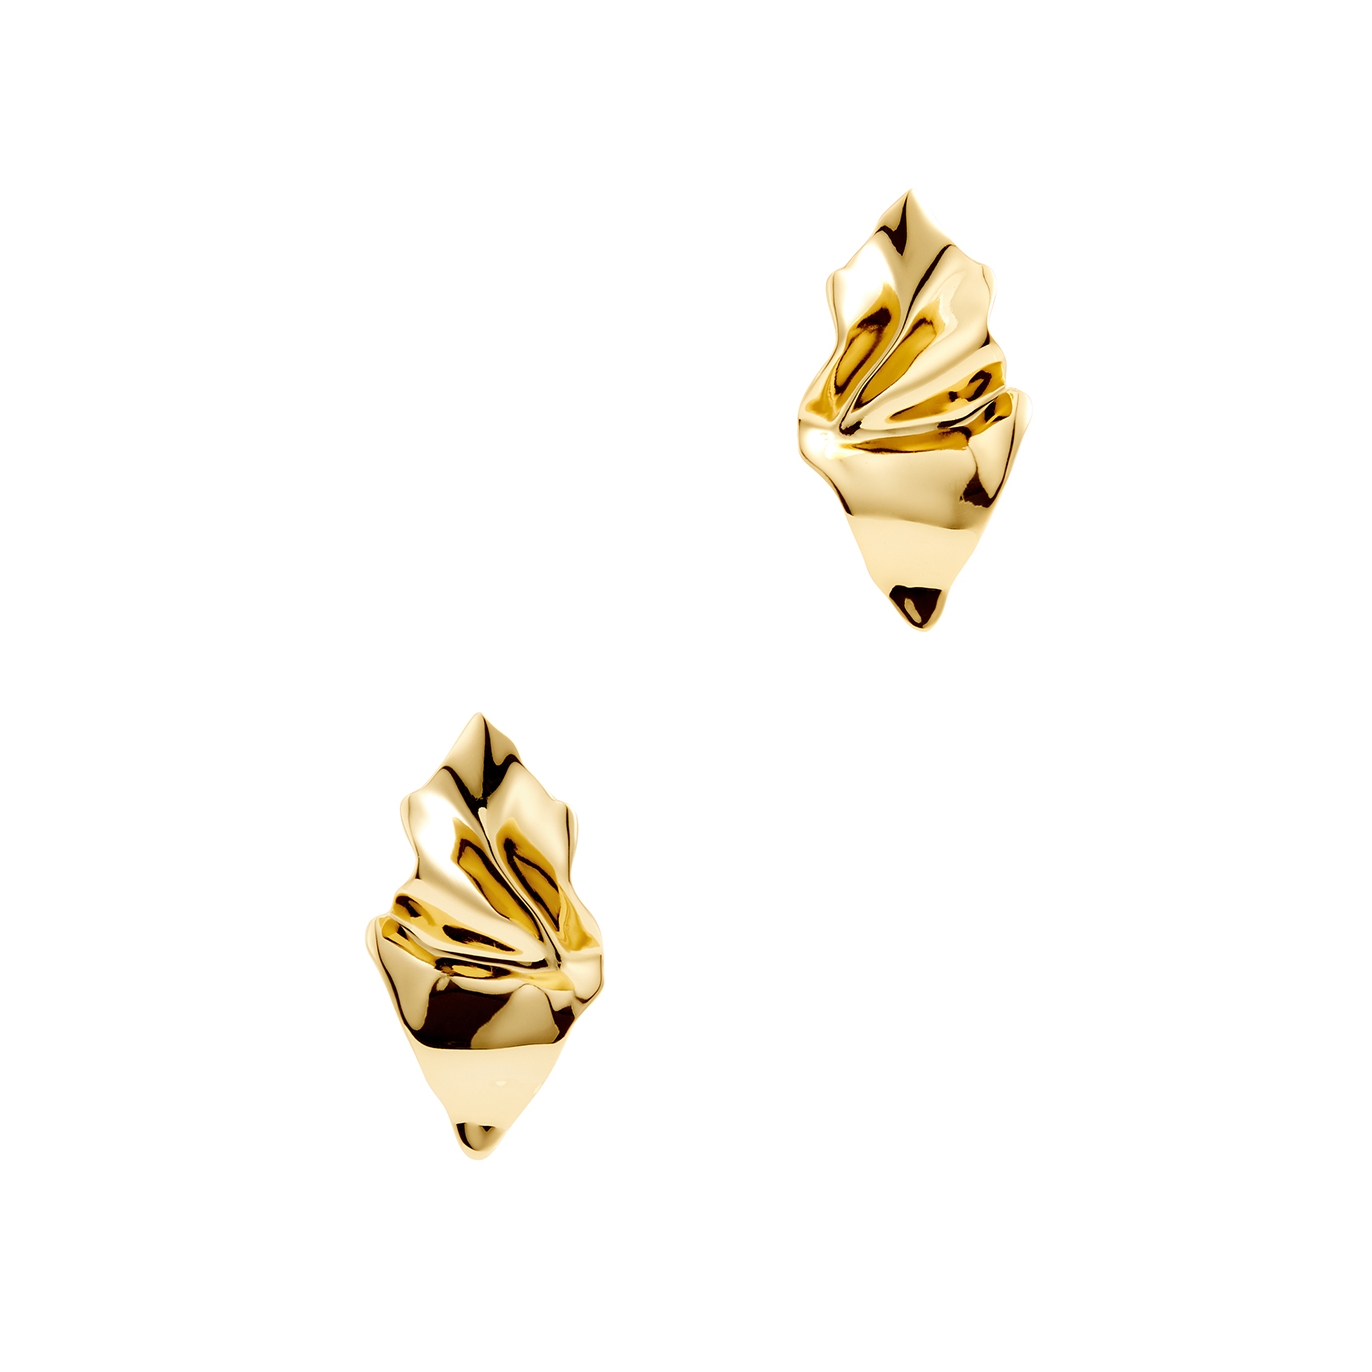 Alexis Bittar Crumpled 14kt Gold-plated Earrings